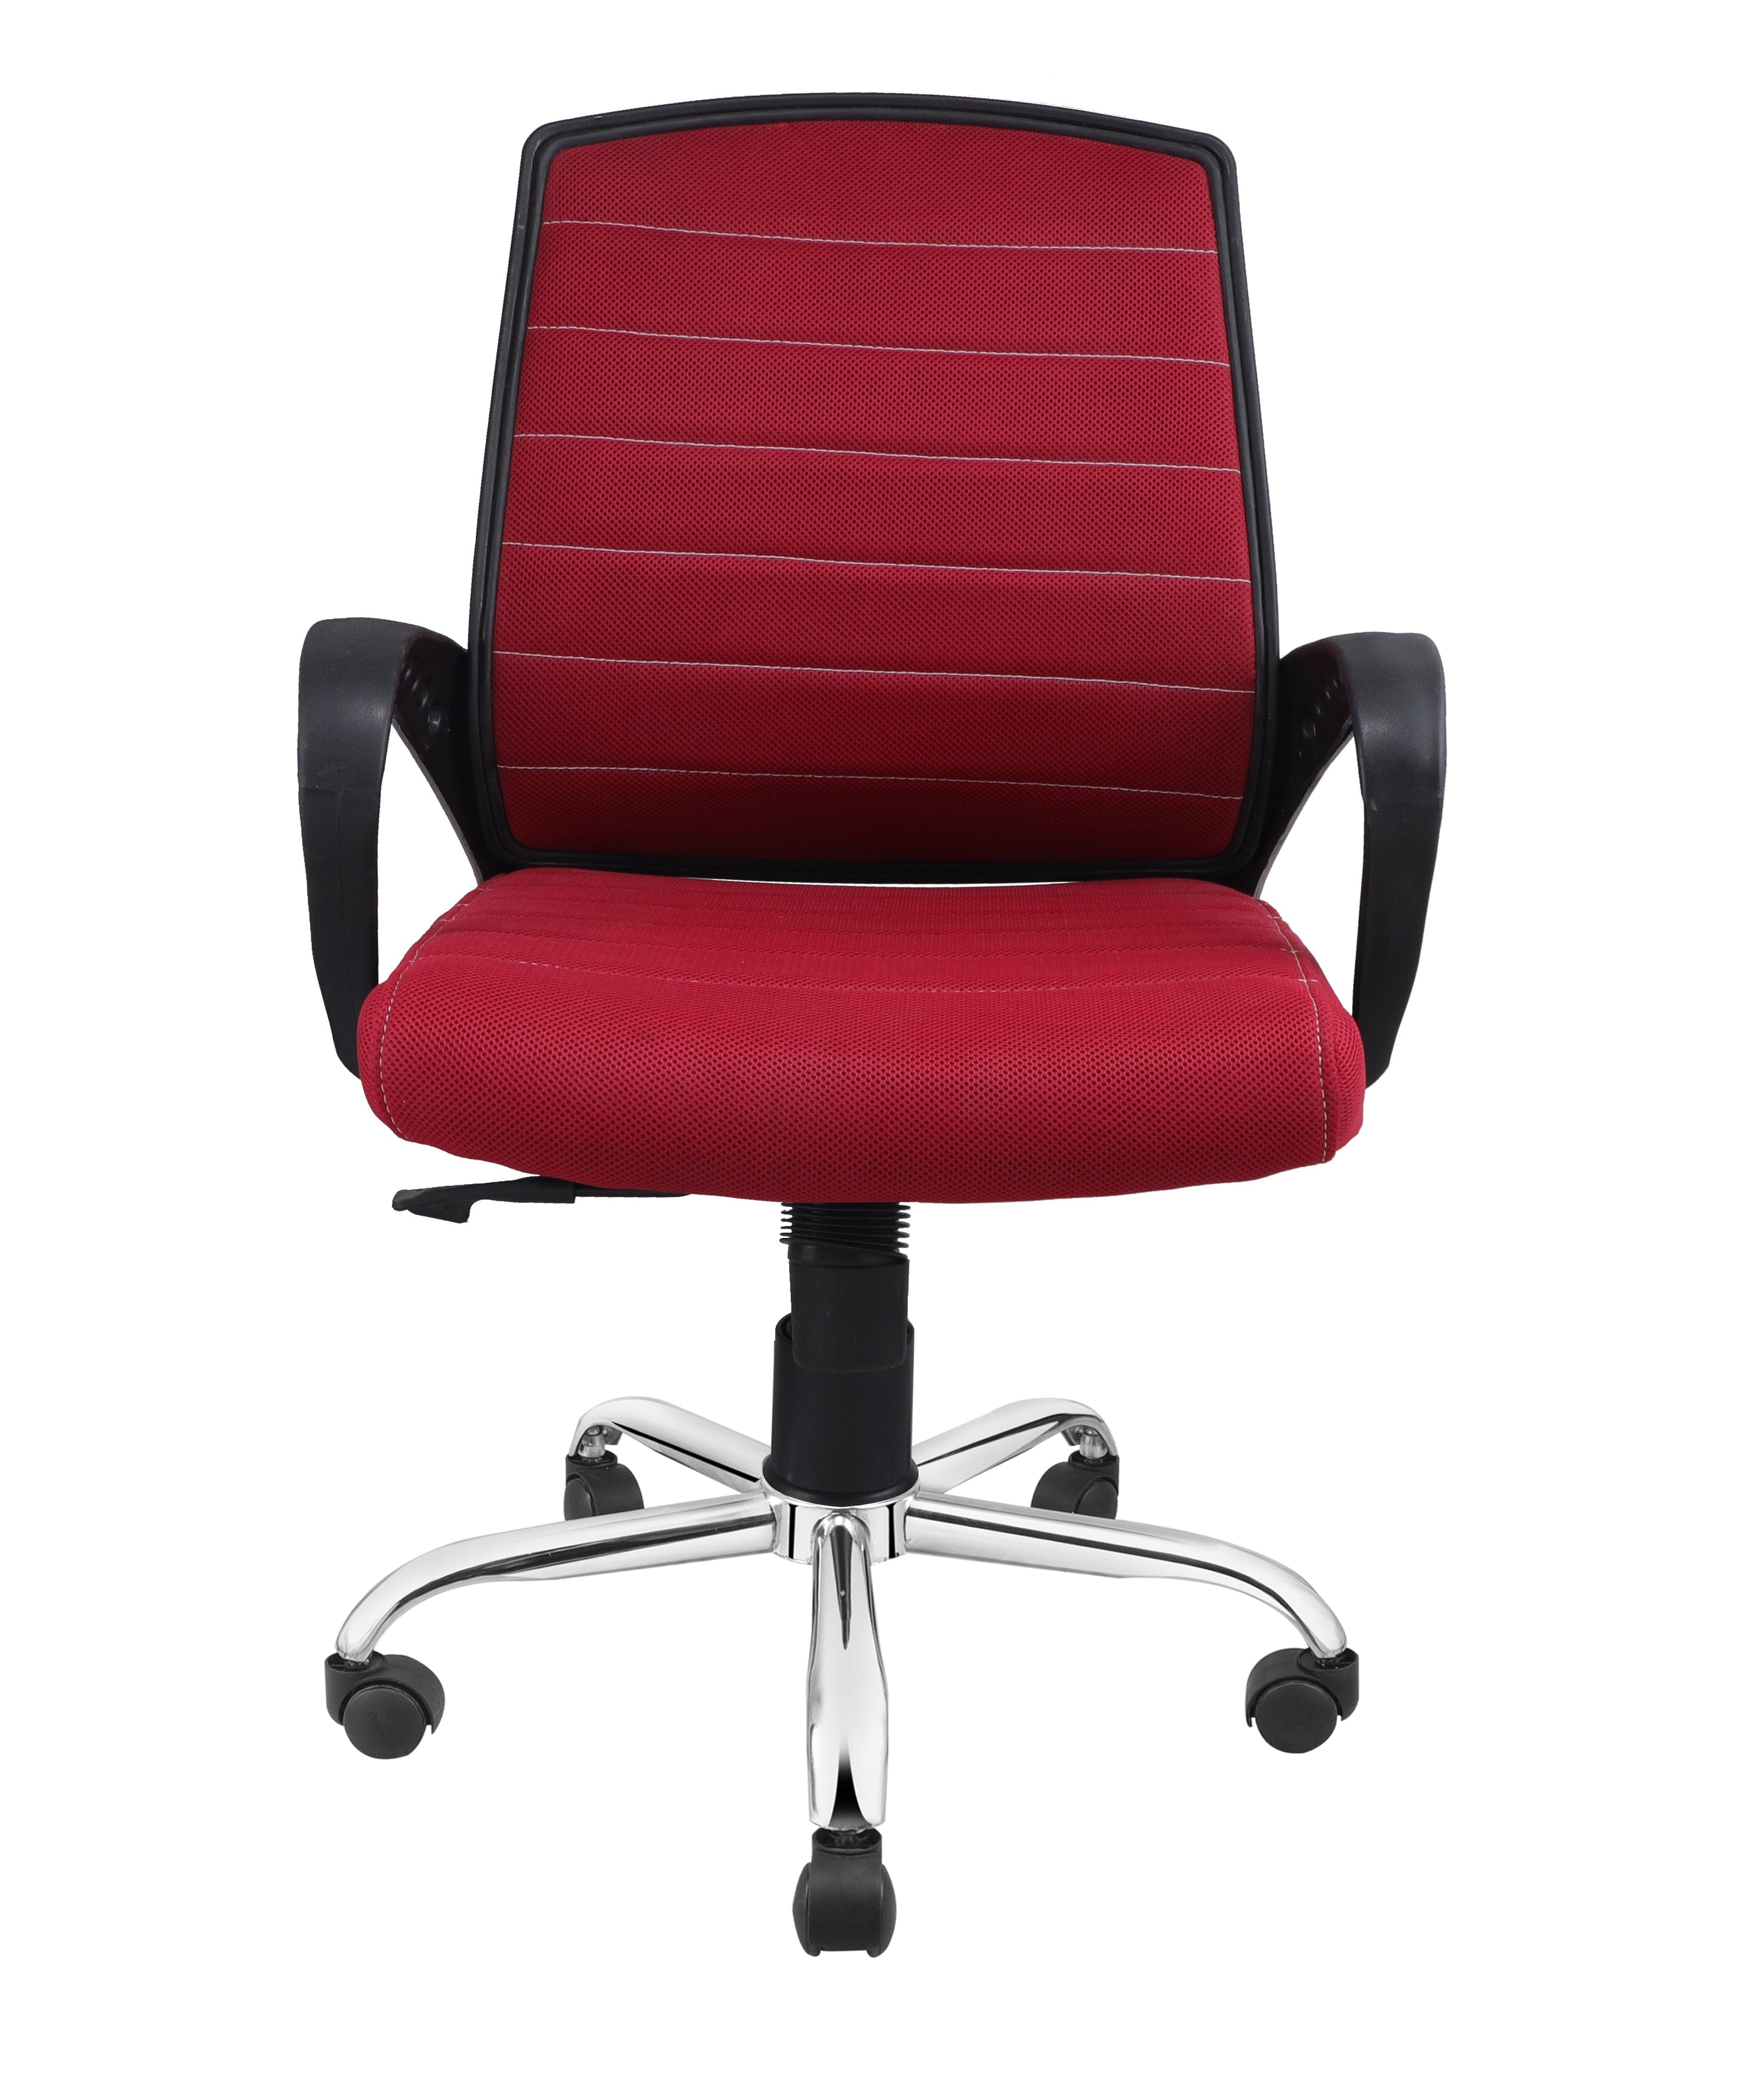 Smart Ergonomic Chair With Breathable Red Mesh Fabric